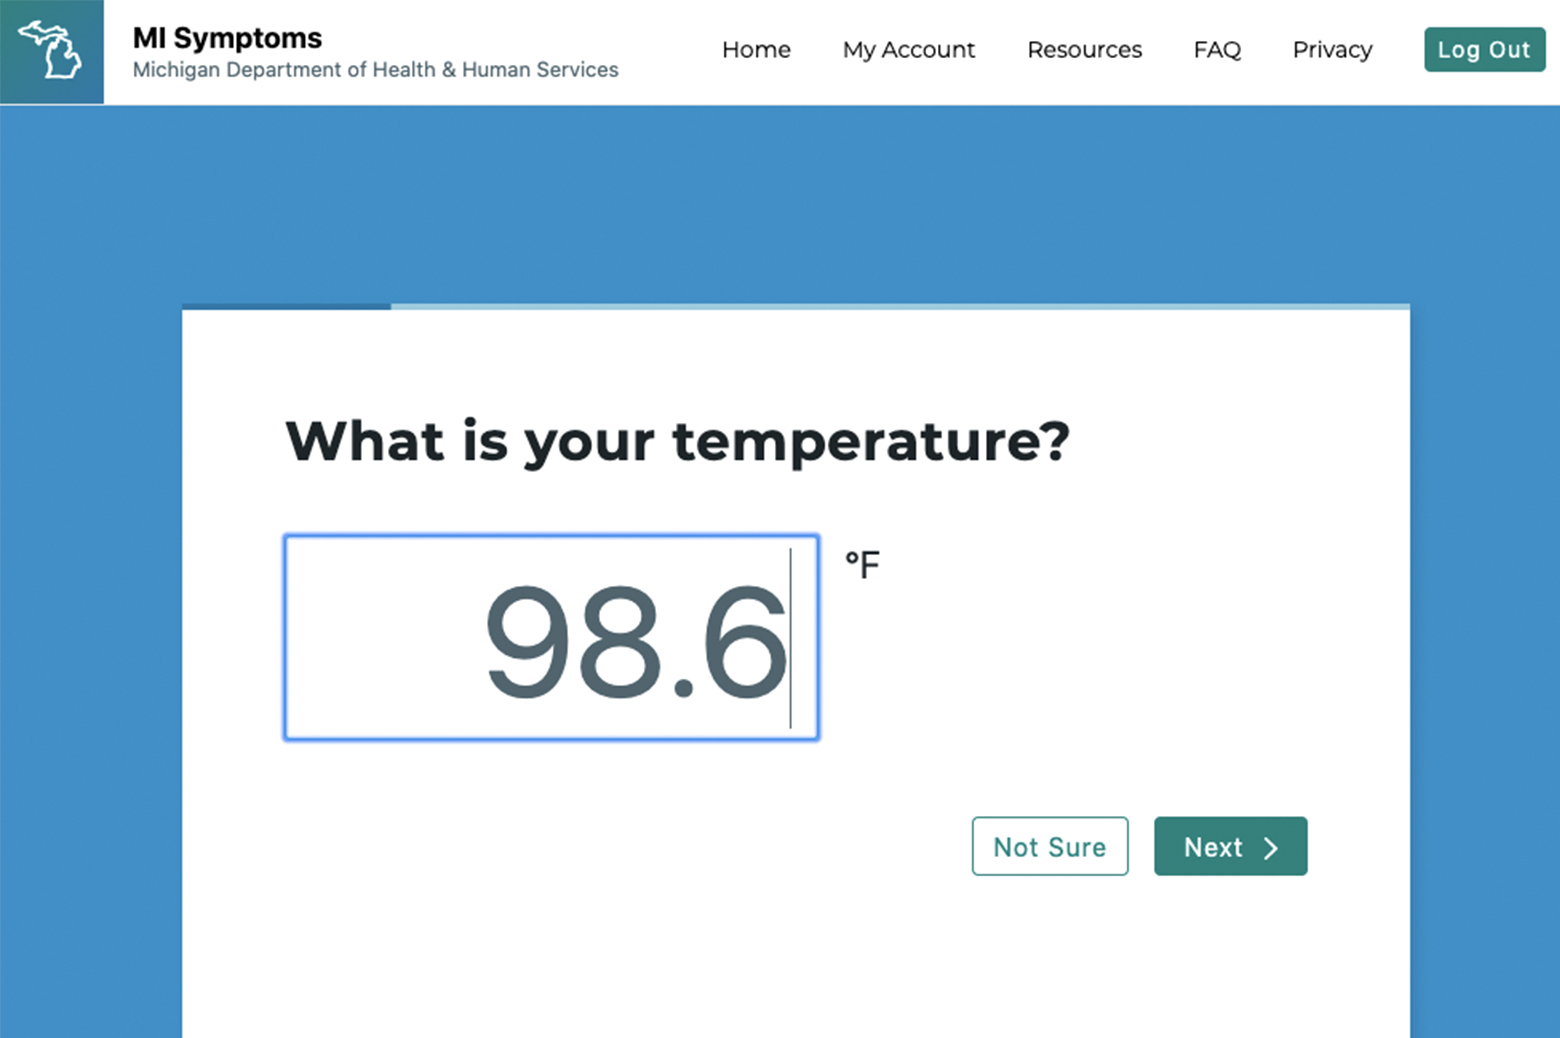 An app prompt asking for the user's temperature